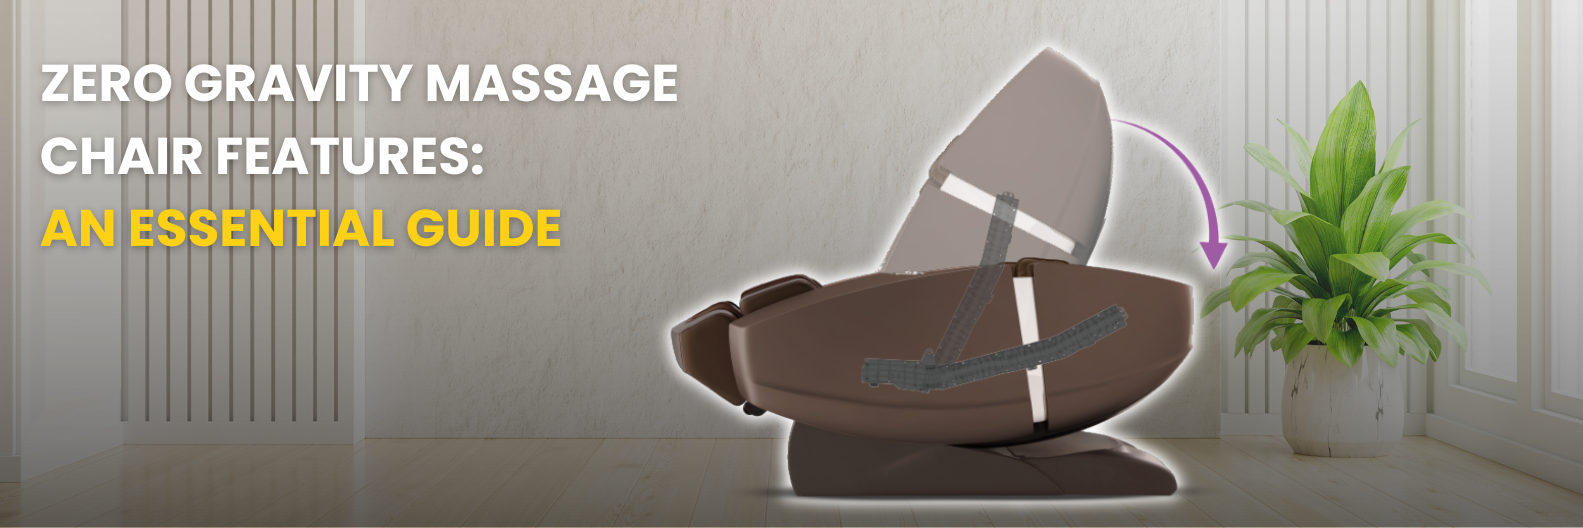 Learn about the different types of zero gravity massage chair features and relax and revitalize in the comfort of your own home.  